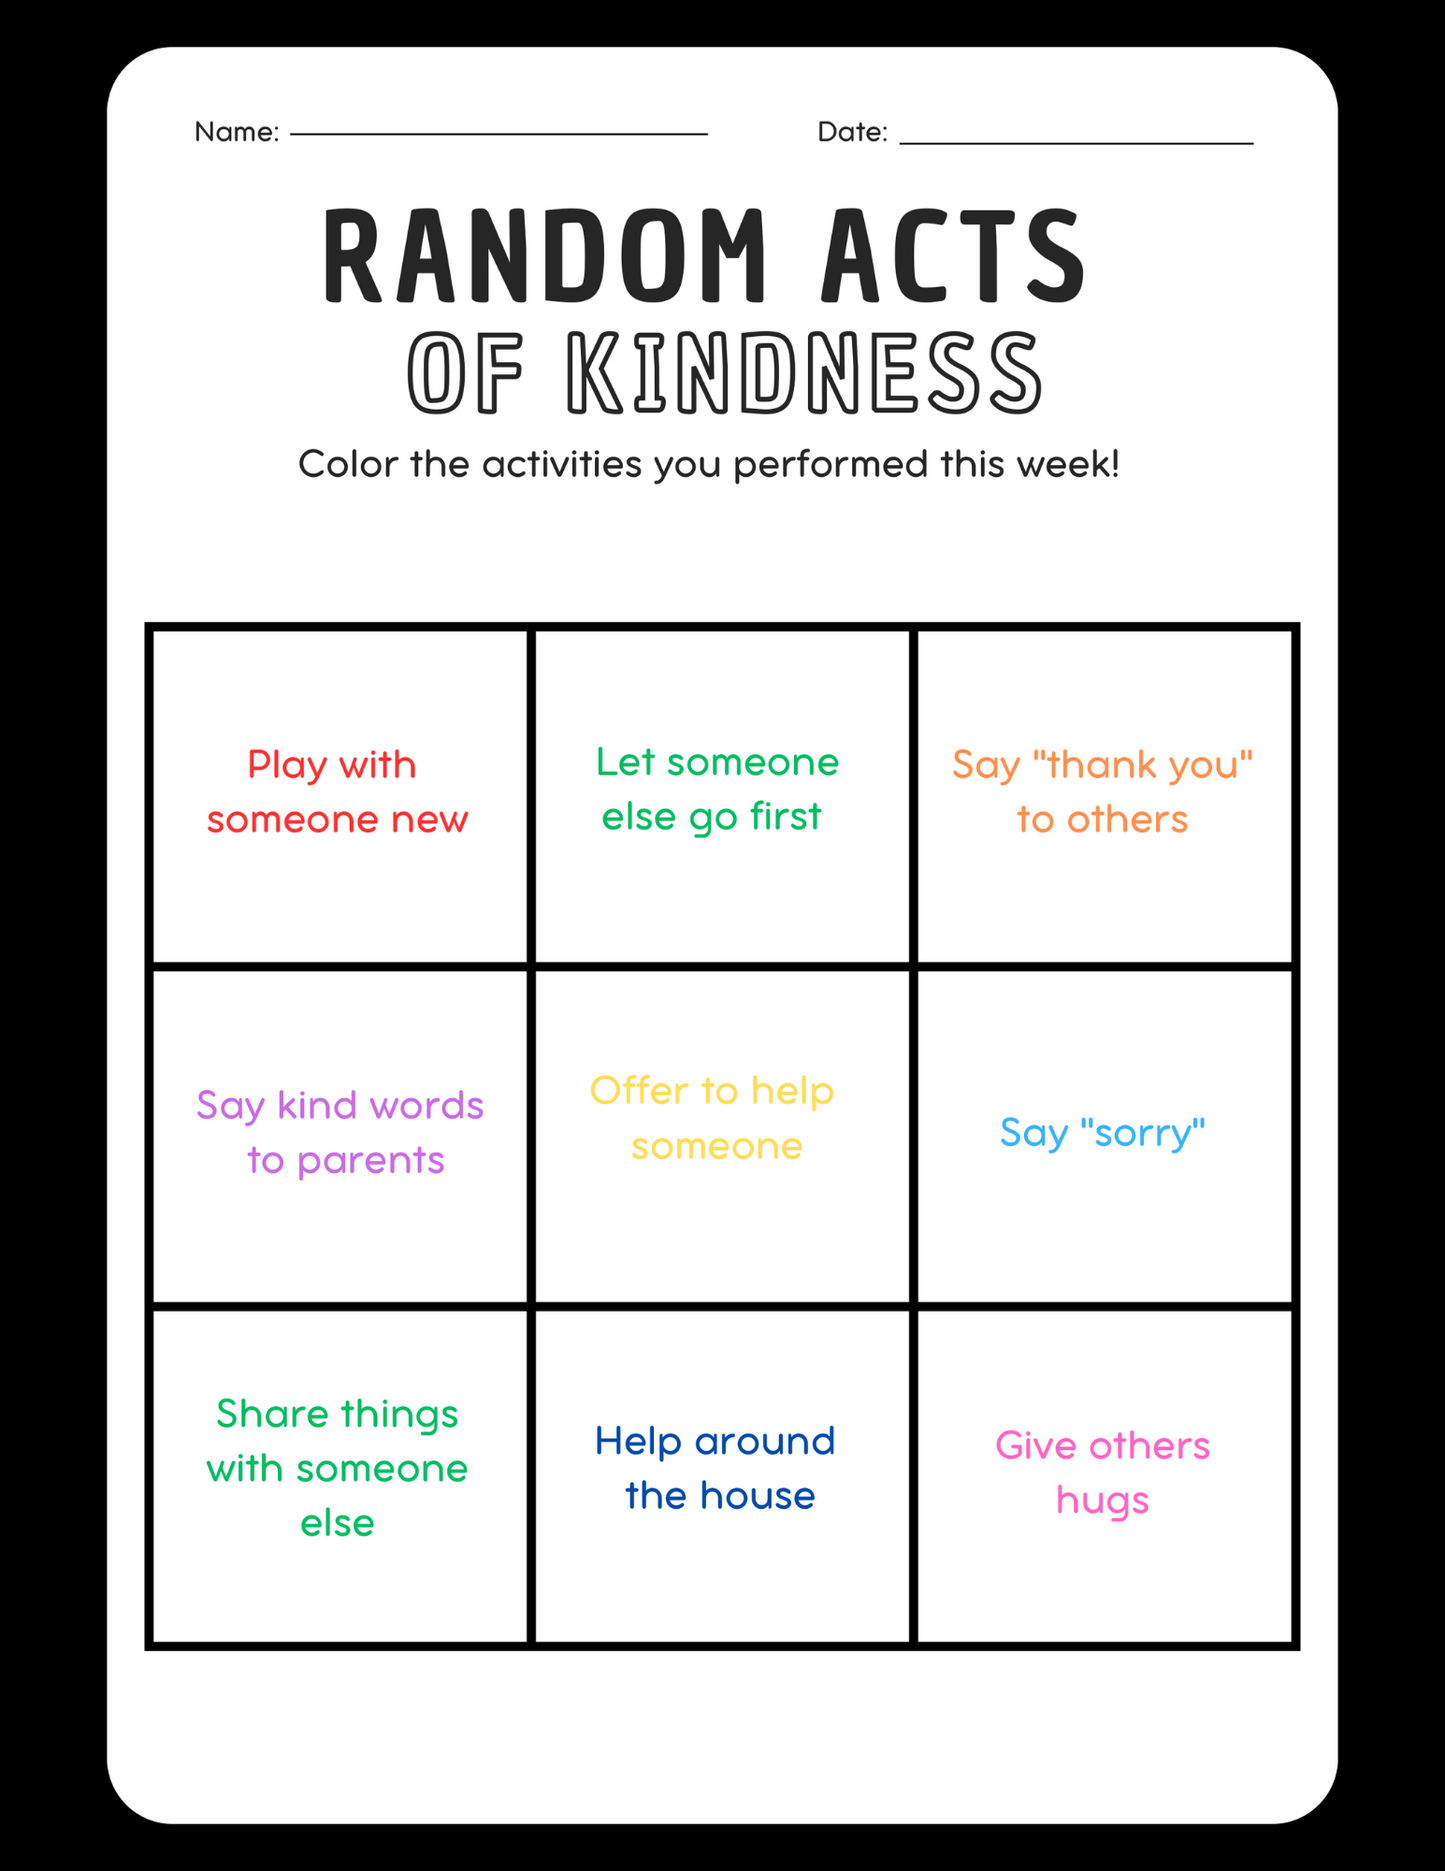 Family Compassion and Kindness Coloring Workbook random acts of kindness page